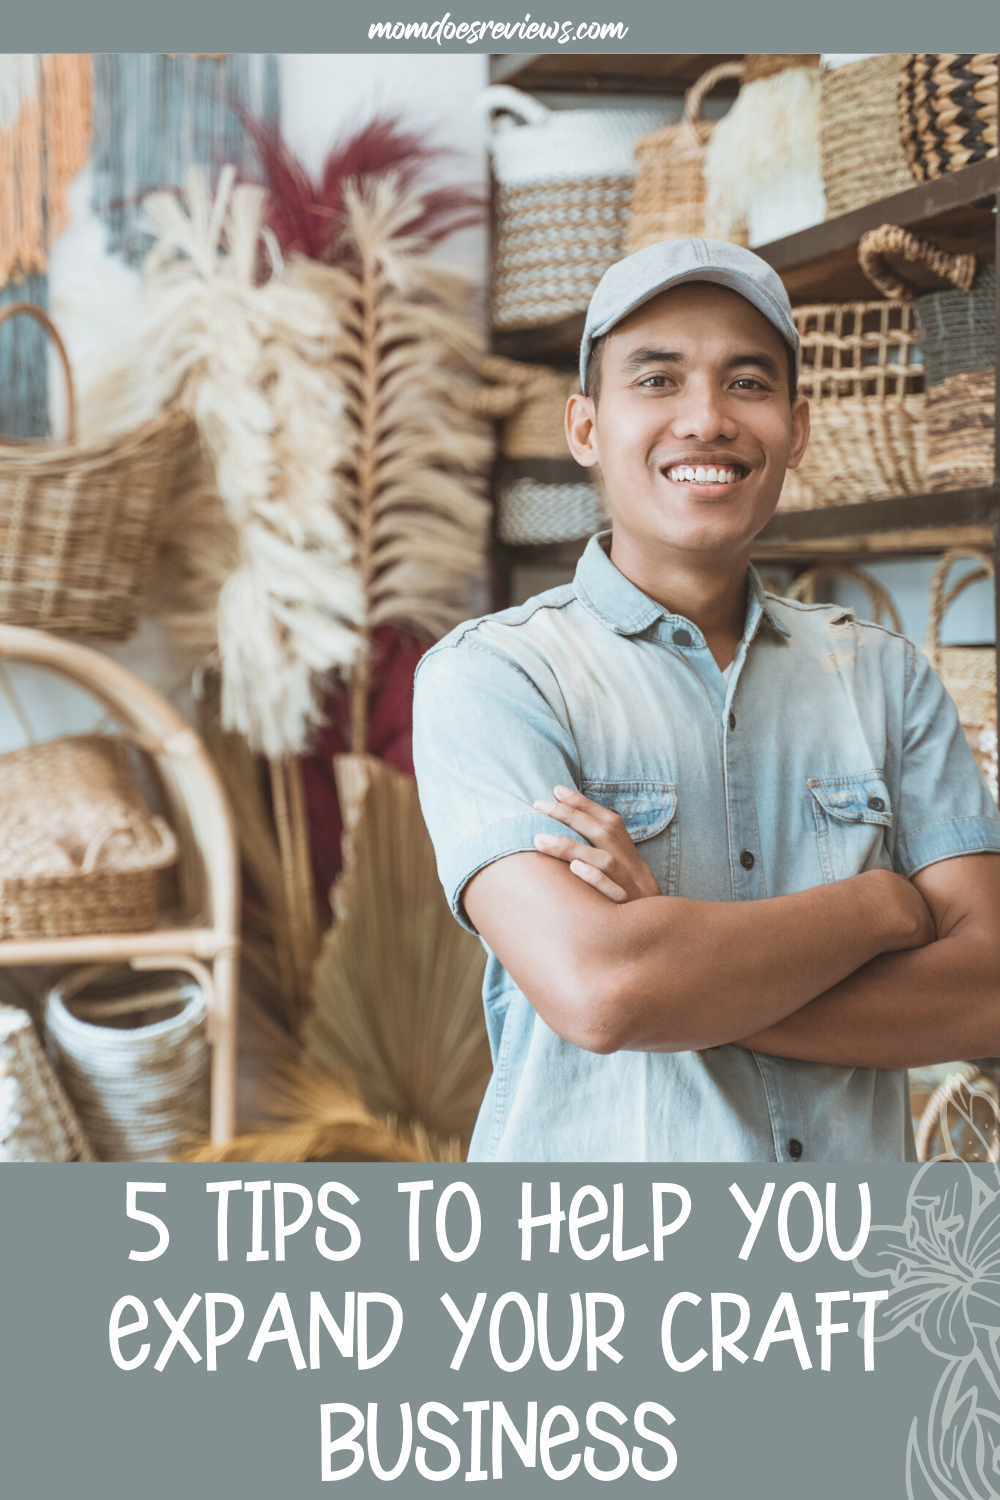 5 Tips to Help You Expand Your Craft Business